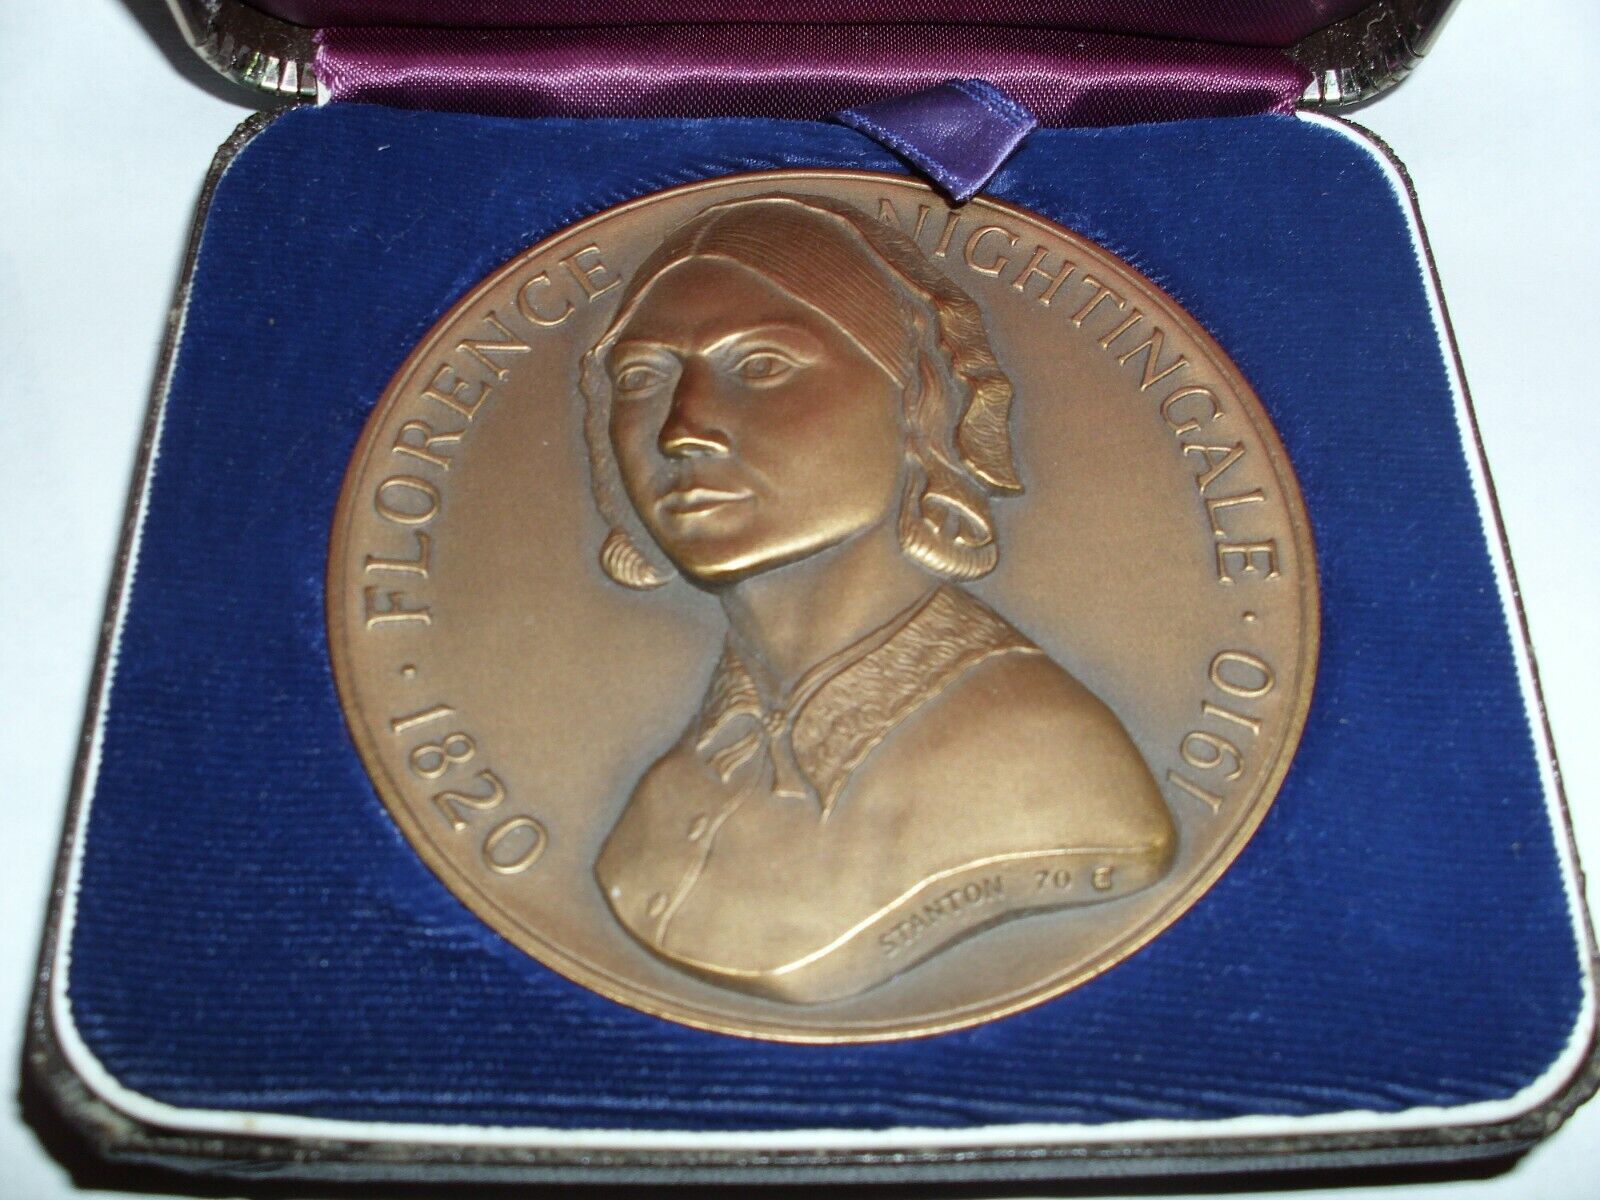 FLORENCE NIGHTINGALE SOLID BRONZE MEDAL BY MEDICAL HERITAGE SOCIETY IN BOX RARE